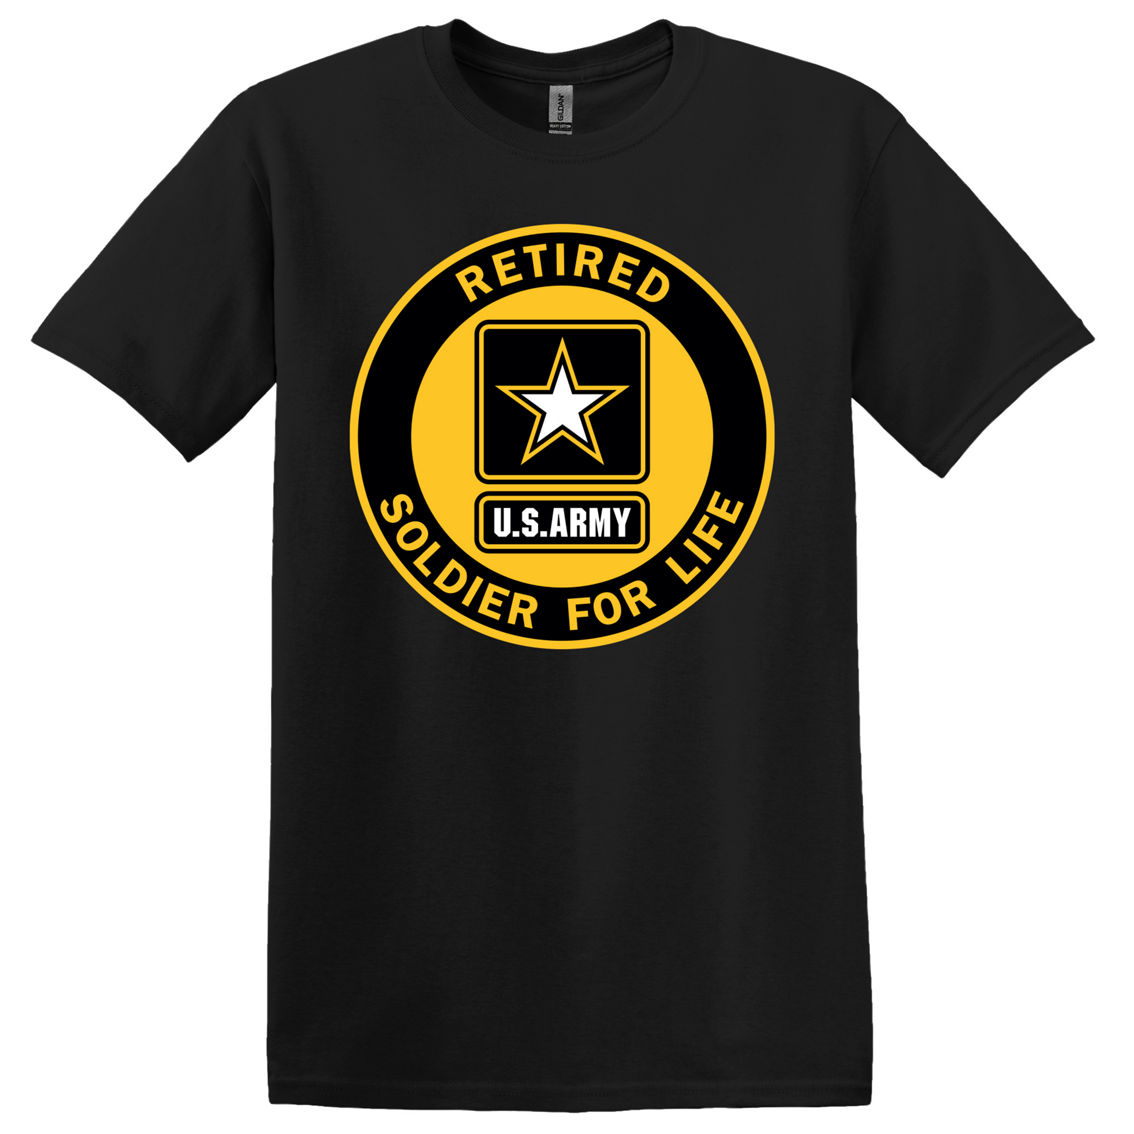 Eagle Crest Retired U.s. Army Soldier For Life Tee | Clothing | Food ...